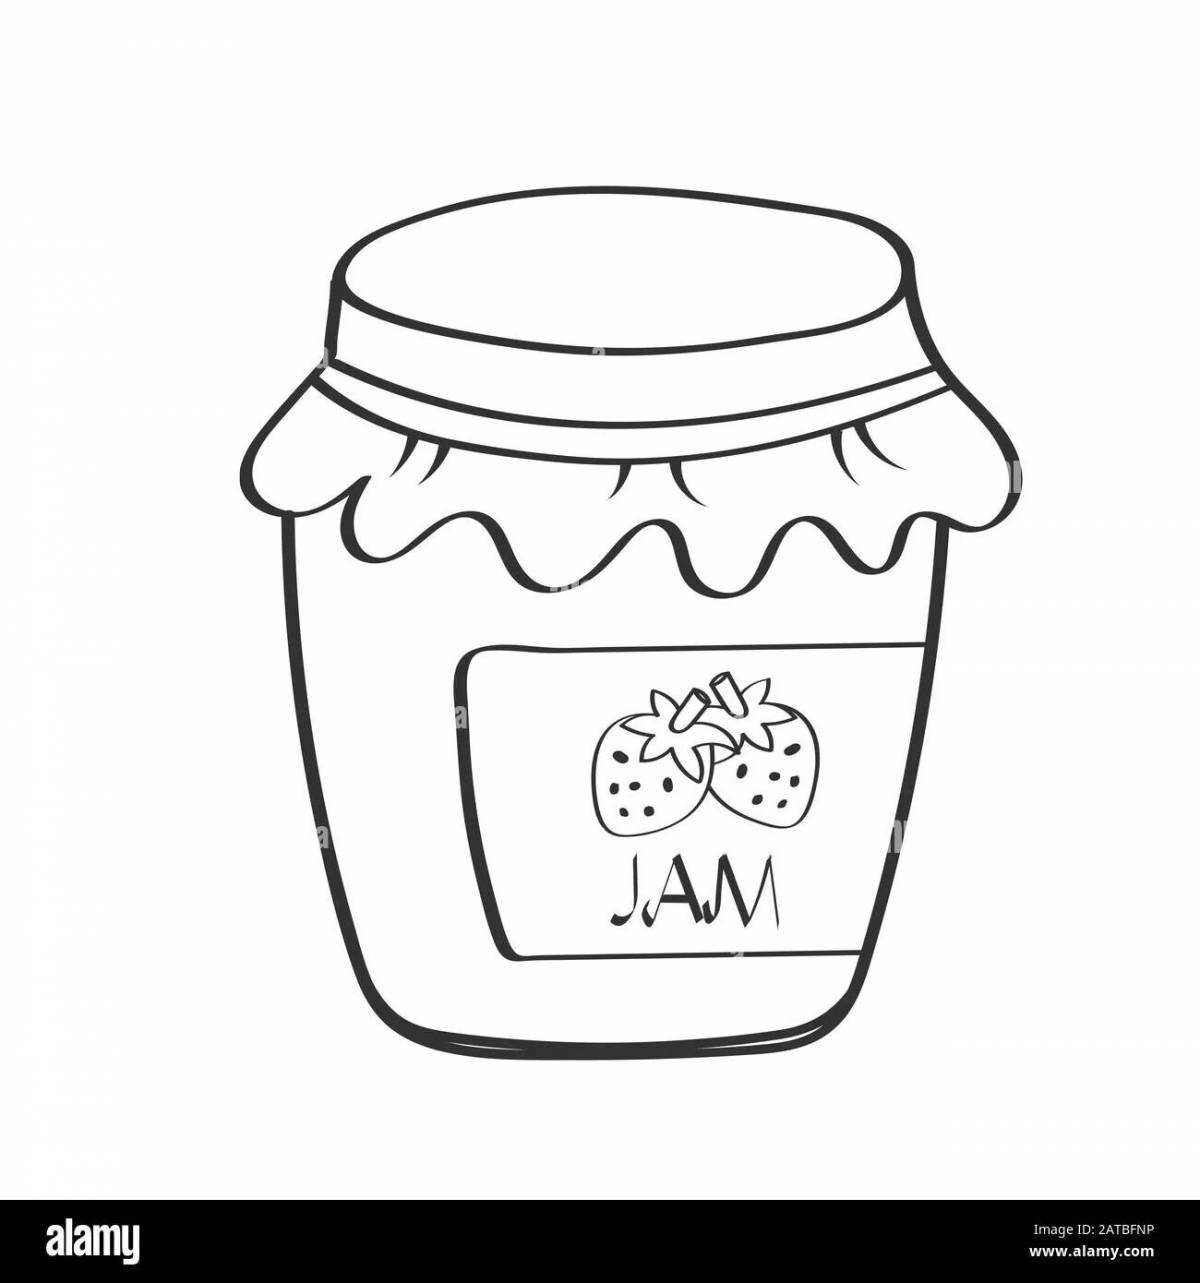 Playful jam coloring page